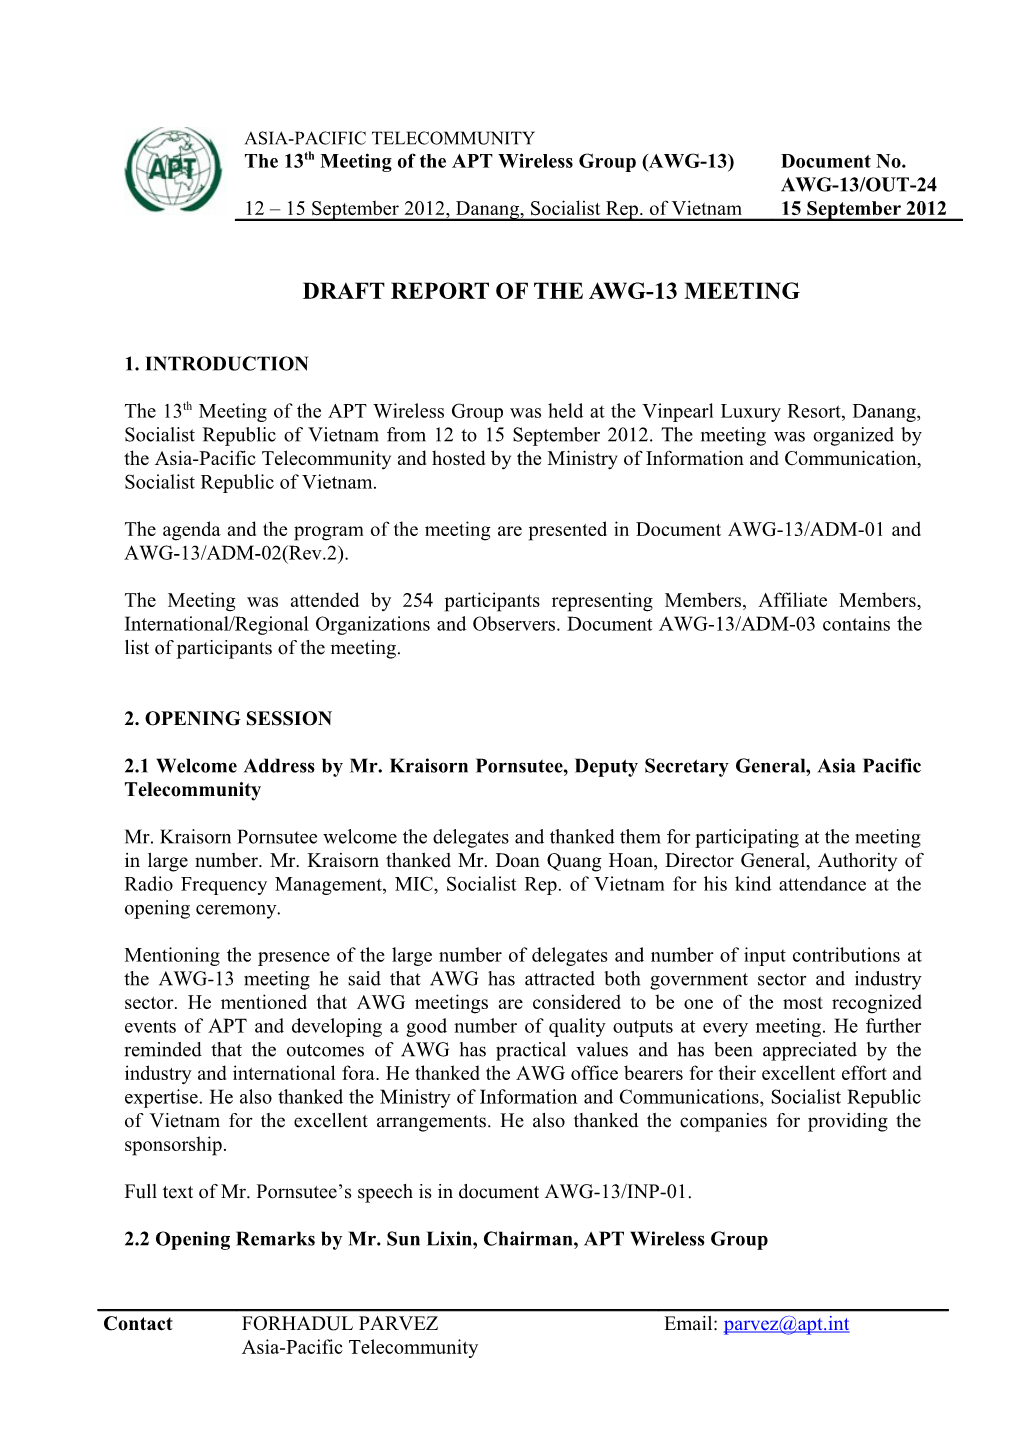 Draft Report of the Awg-13 Meeting